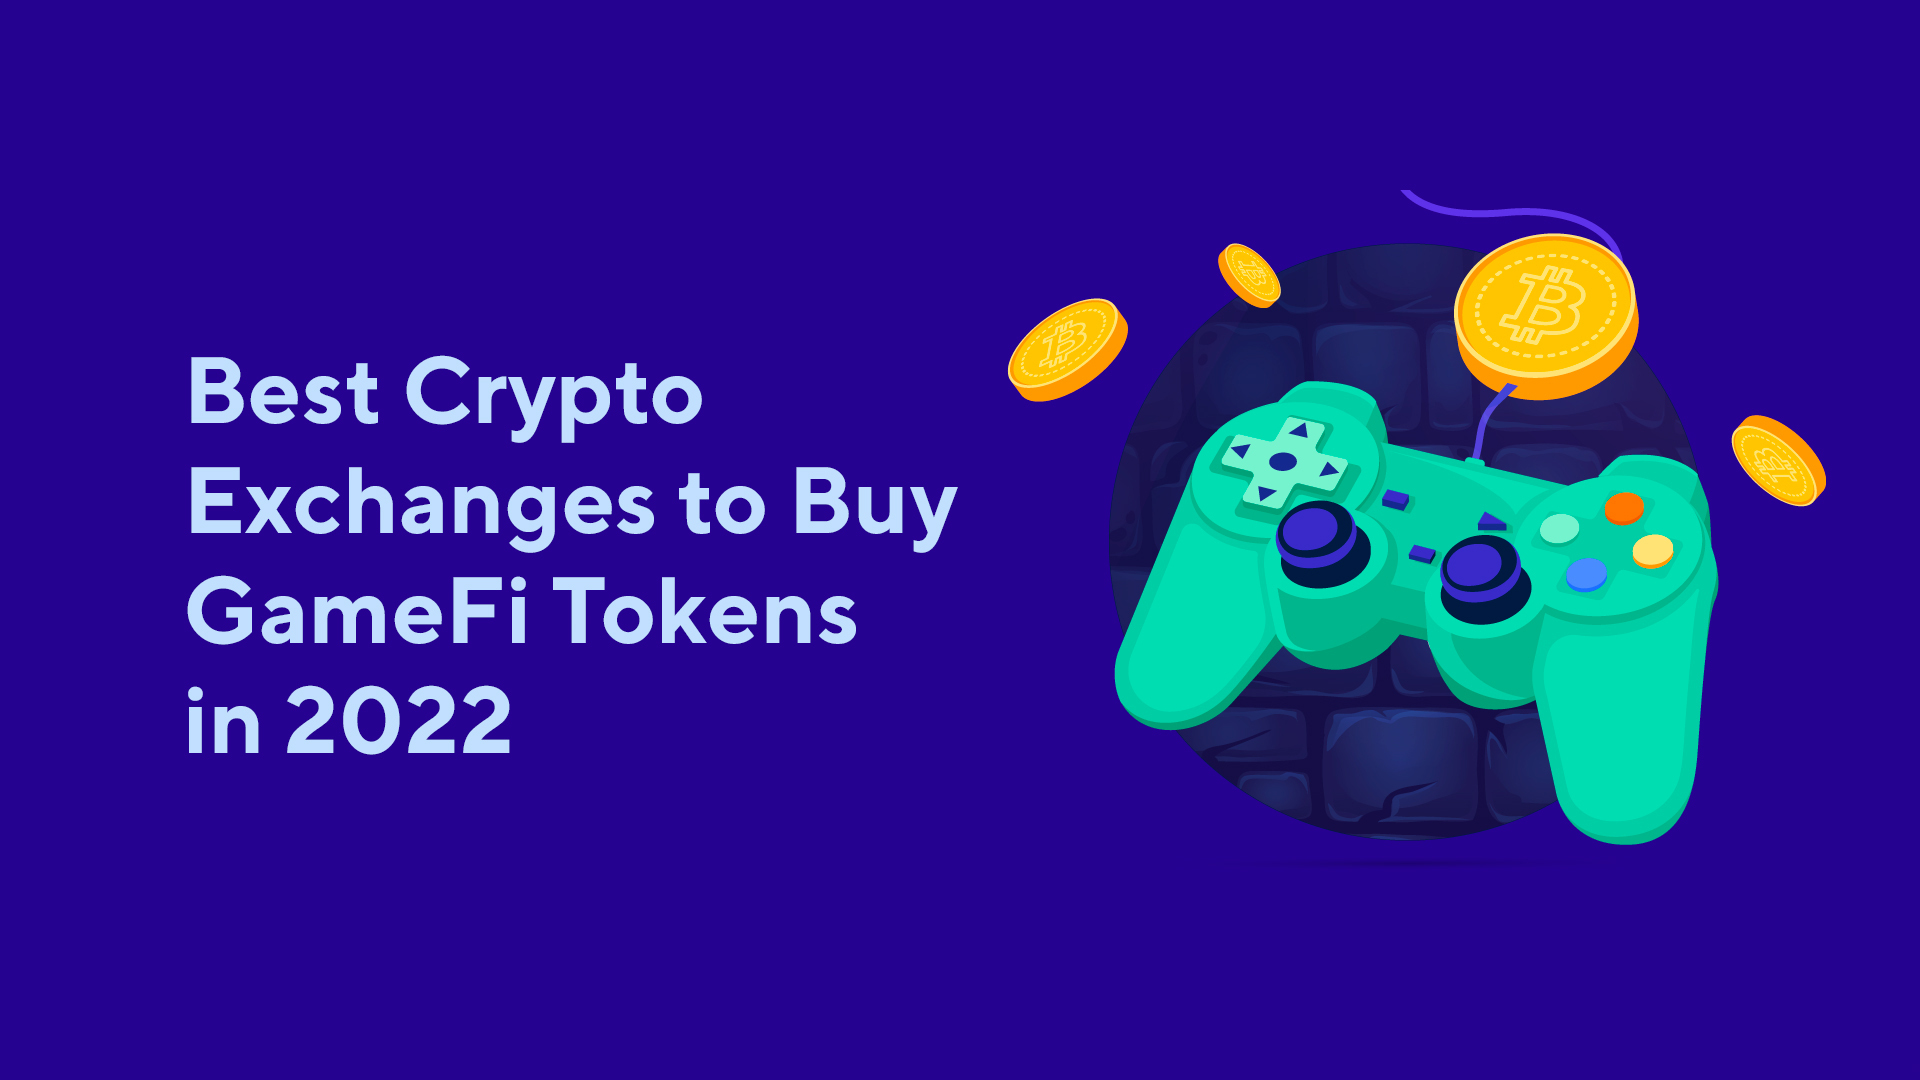 Best Crypto Exchanges to Buy GameFi Tokens in 2022